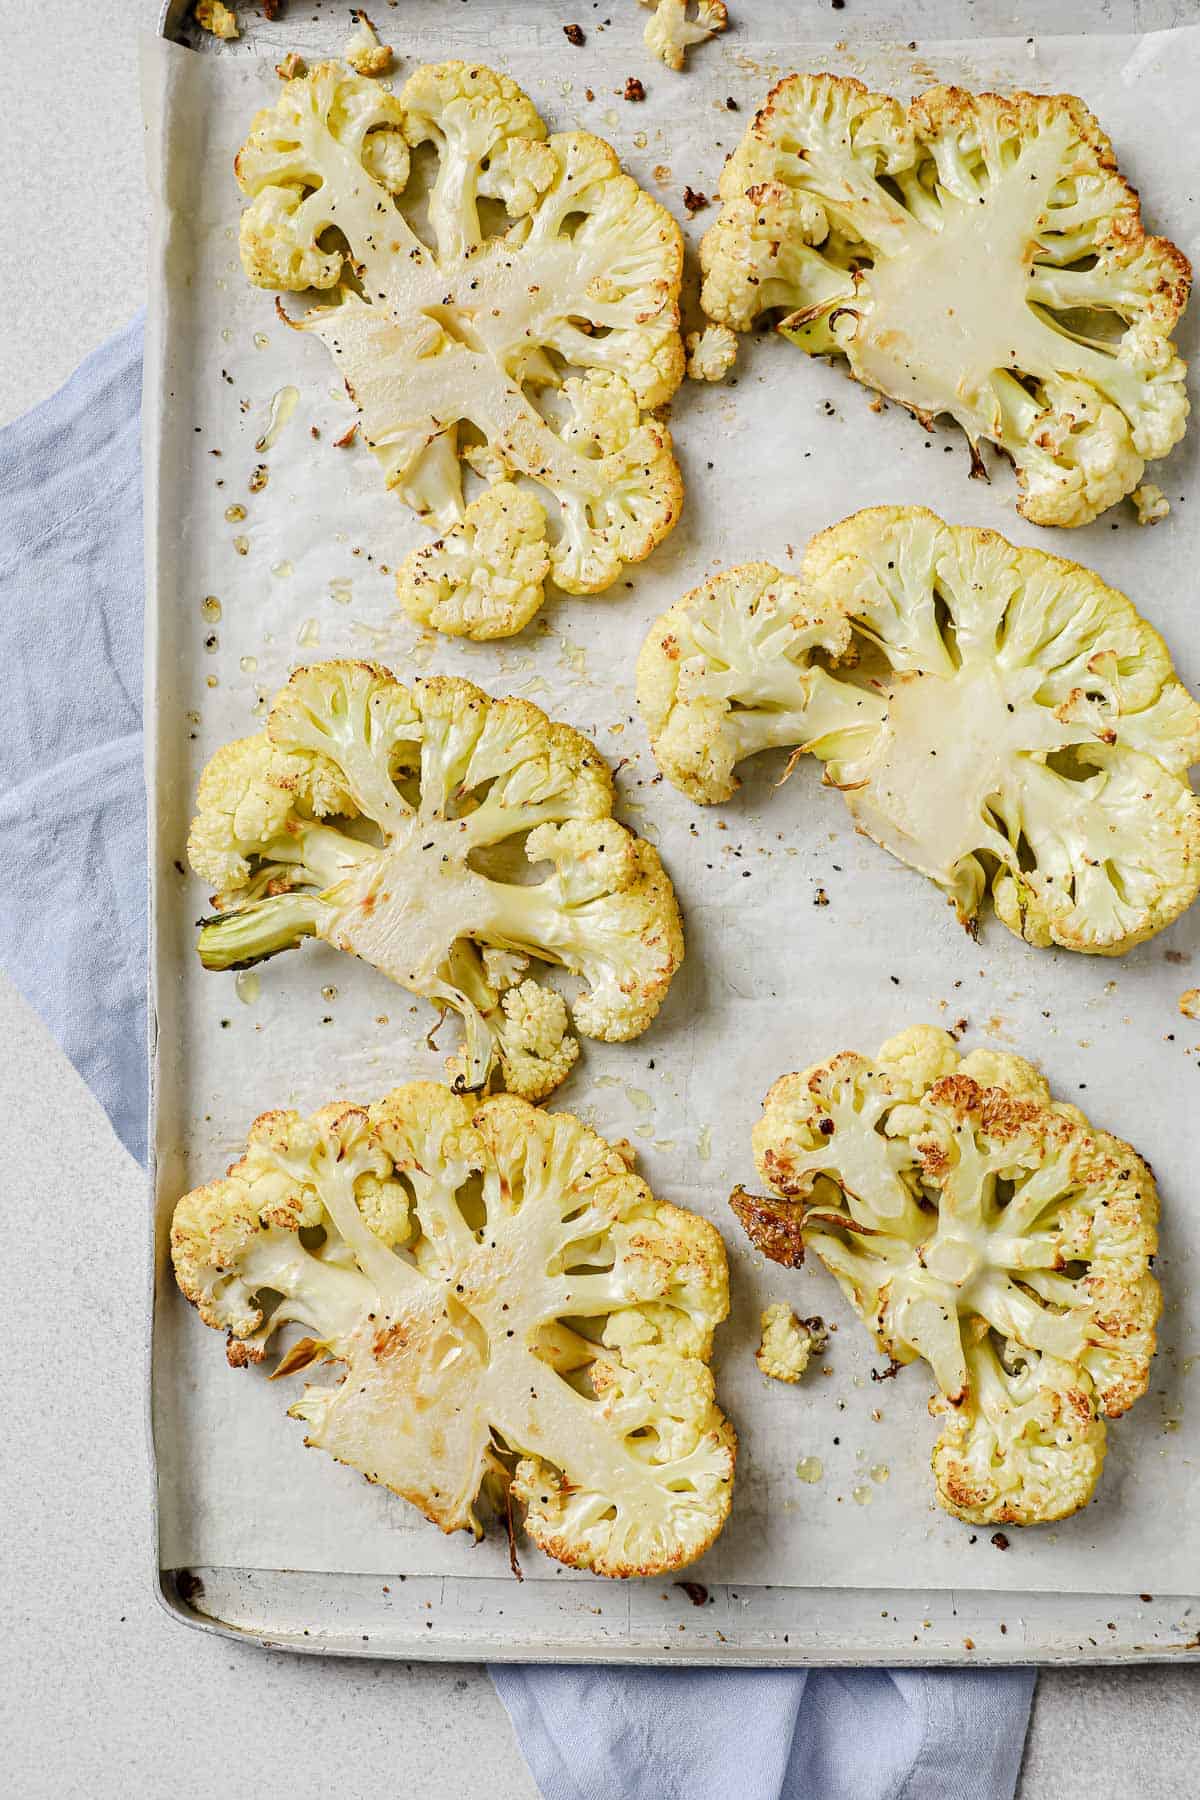 Roasted cauliflower steaks on a lined baking sheet, seasoned with salt and pepper